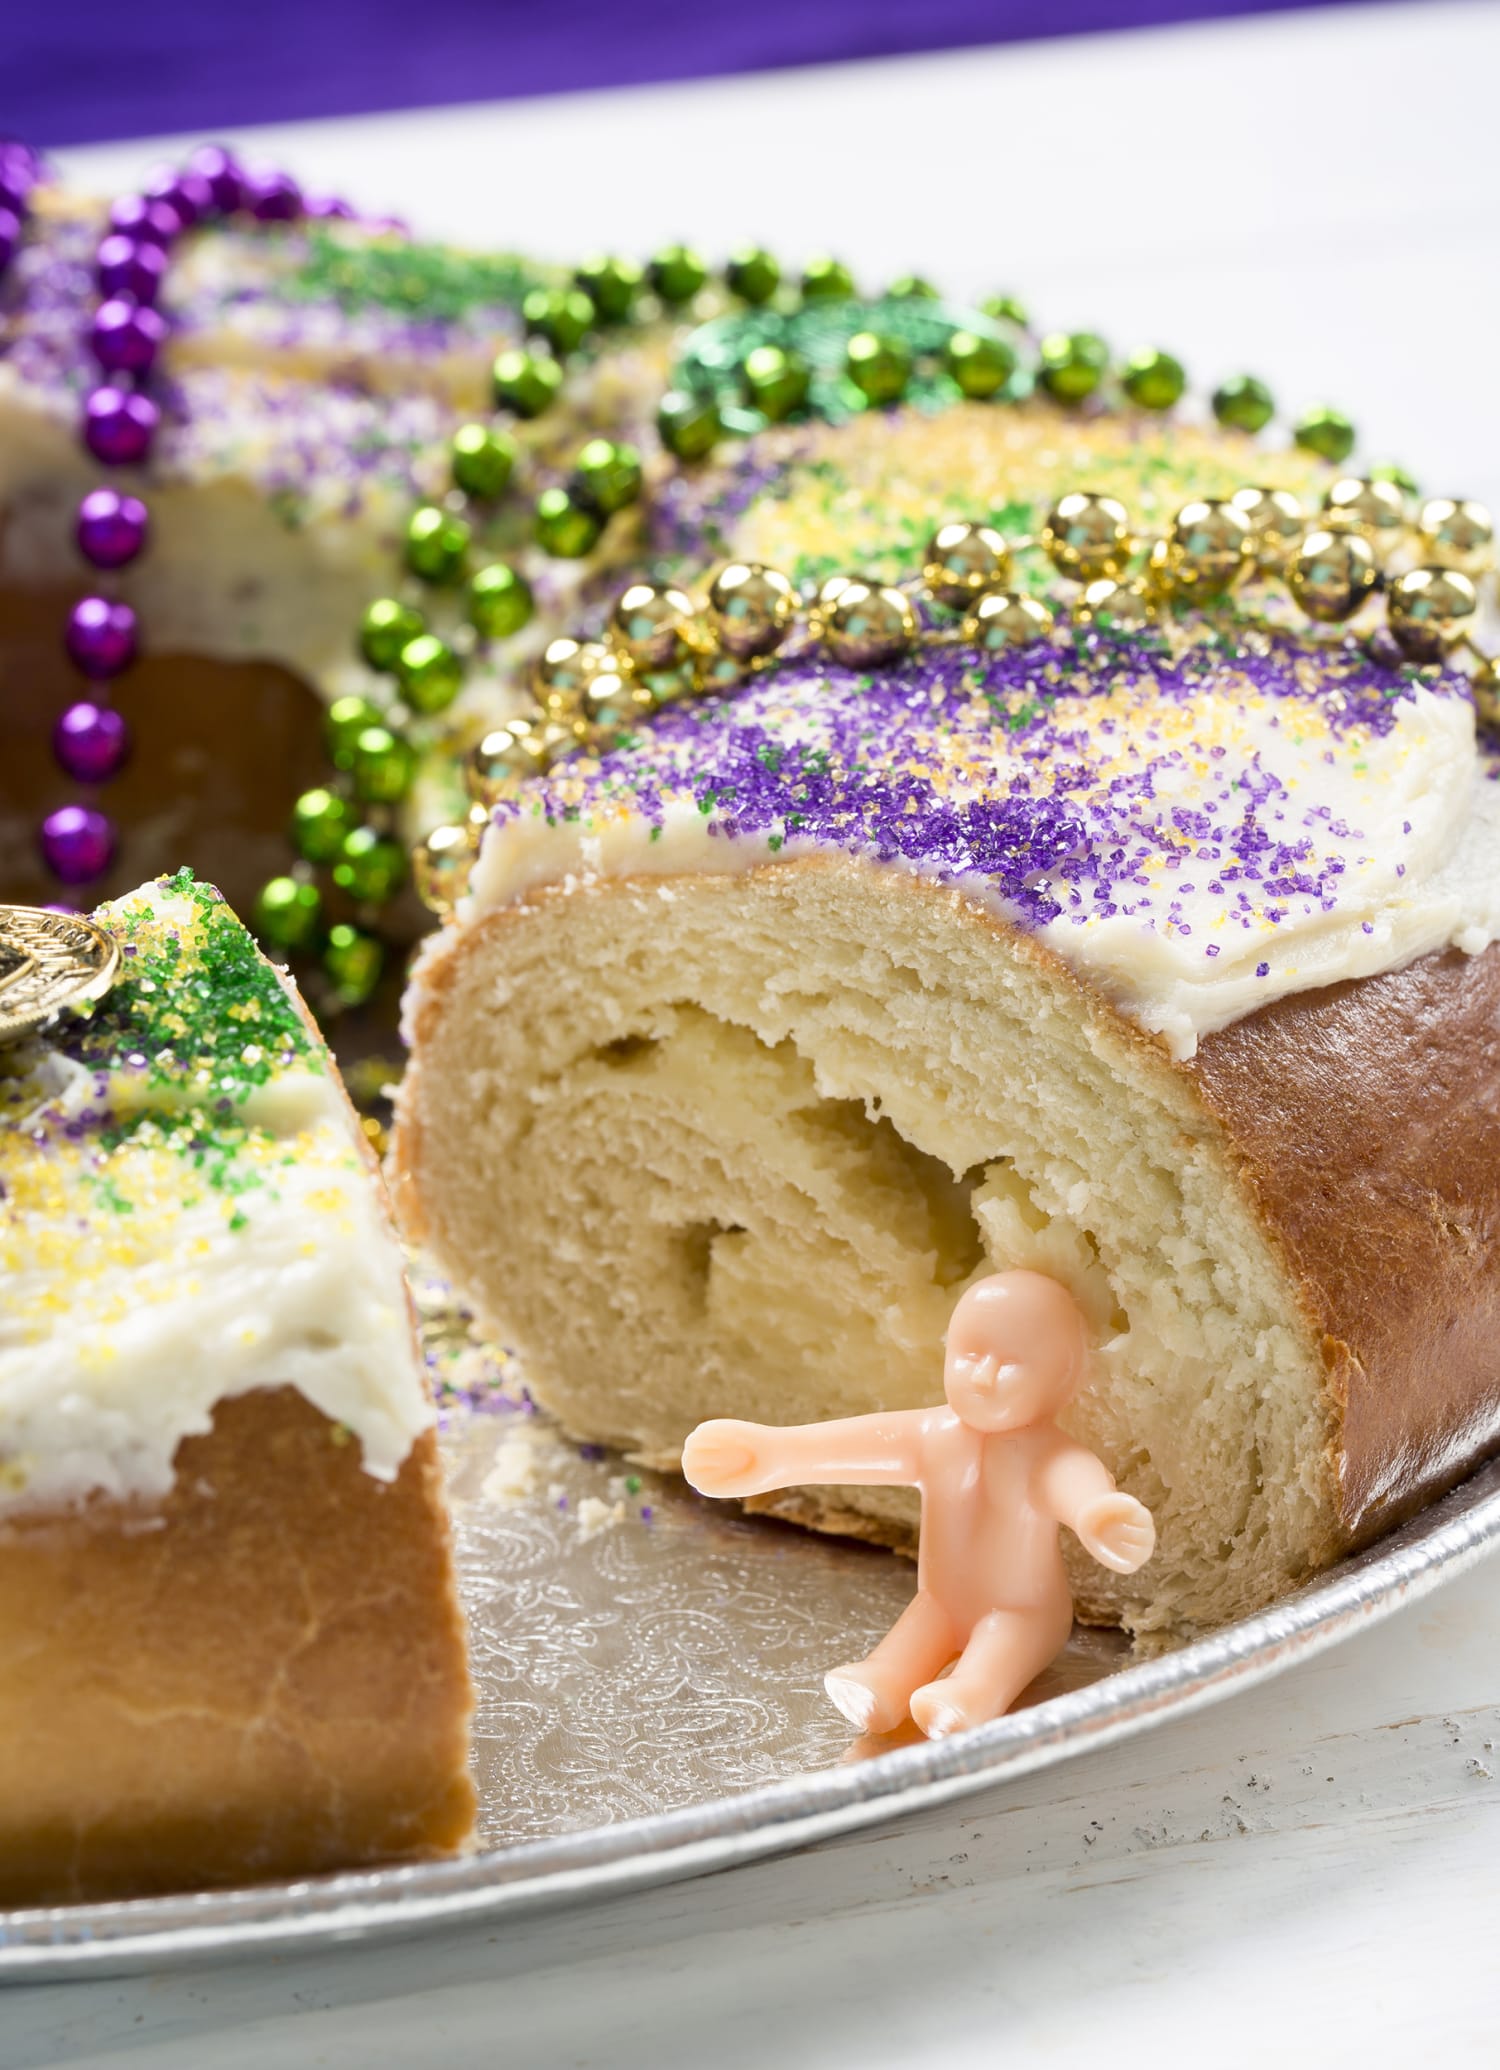 How the King Cake Tradition Began—and Why There's a Plastic Baby